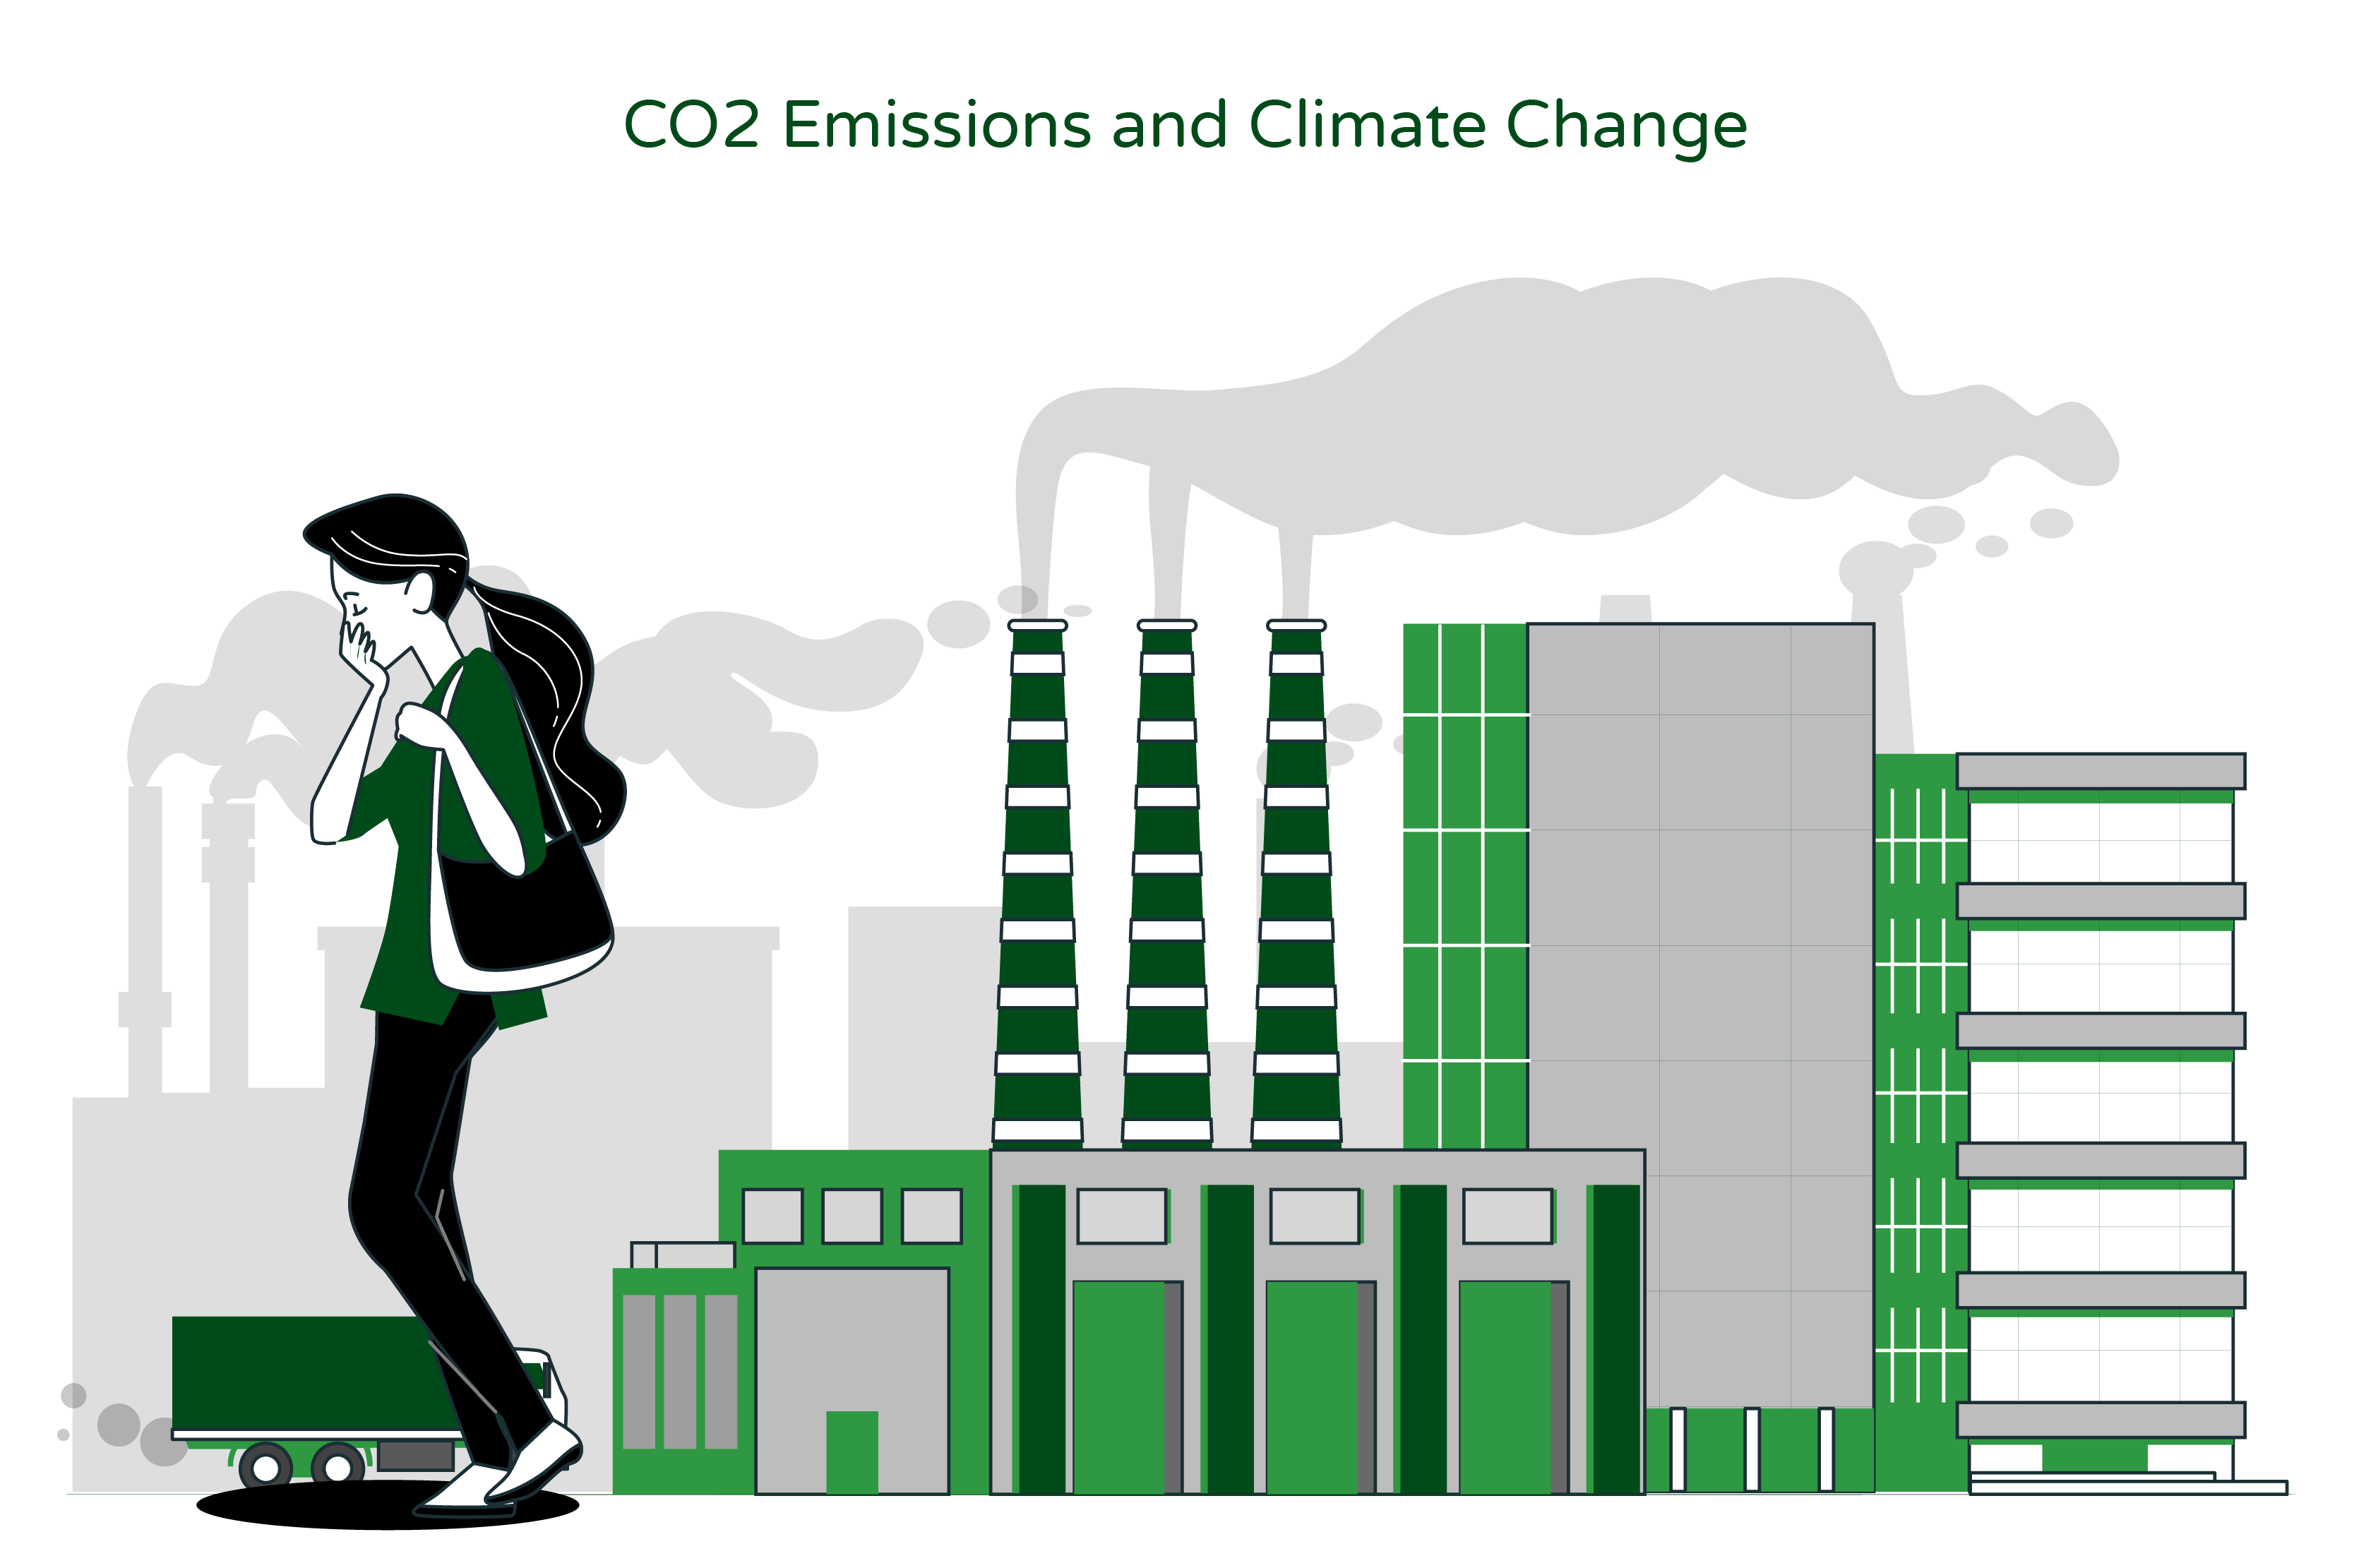 Illustration titled 'CO2 Emissions and Climate Change' depicting industrial emissions of carbon dioxide (CO2) and the negative impact on human health."  The illustration portrays two elements: industrial CO2 emissions and the adverse effects on human health.  On the right side of the image, there are visual representations of industries emitting CO2. This can include factories, smokestacks, or other sources of significant CO2 emissions. The emphasis is on showcasing the scale and impact of industrial activities contributing to CO2 levels in the atmosphere.  On the left side of the image, there is a girl depicted outside who appears unwell and struggling to breathe. This visual element represents the negative consequences of increased CO2 concentrations on human health. It aims to convey the idea that high levels of CO2 in the atmosphere can contribute to respiratory problems, discomfort, and adverse health effects.  The illustration highlights the link between industrial CO2 emissions and their detrimental impact on human well-being. It serves as a visual reminder of the urgent need to reduce CO2 emissions to mitigate the effects of climate change and safeguard human health.